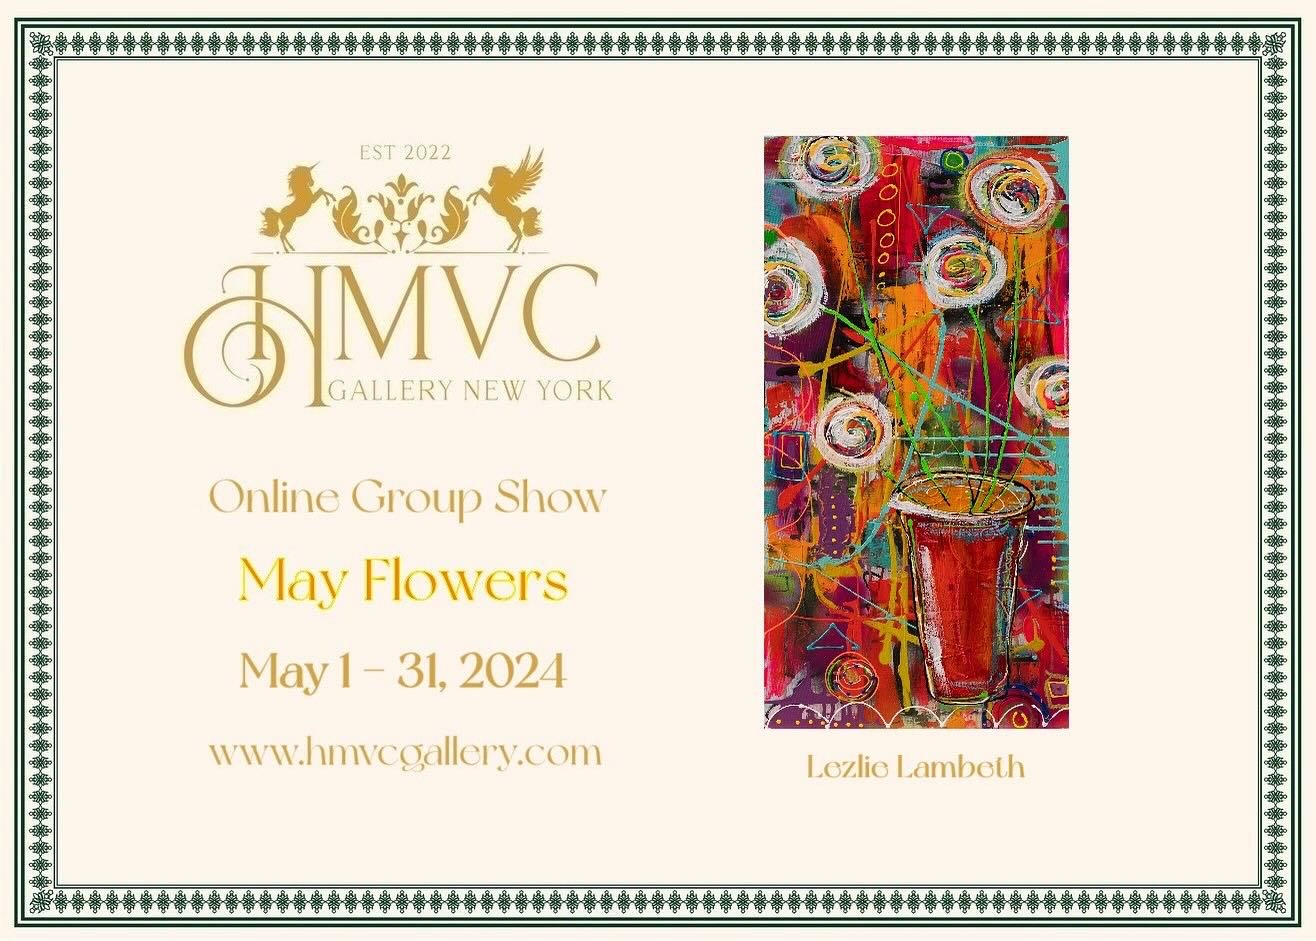 Thank you @hmvcgallery for including me in your May show!!! 🙏🏼🌺🎨
.
.
.

#purplemangostudio #artistsoninstagram #creative #flowerpower #artheals #flower painting #mixedmedia #acrylicpainting #honestart #colorcourseforrebels
#womenwhopaint #lgbtart